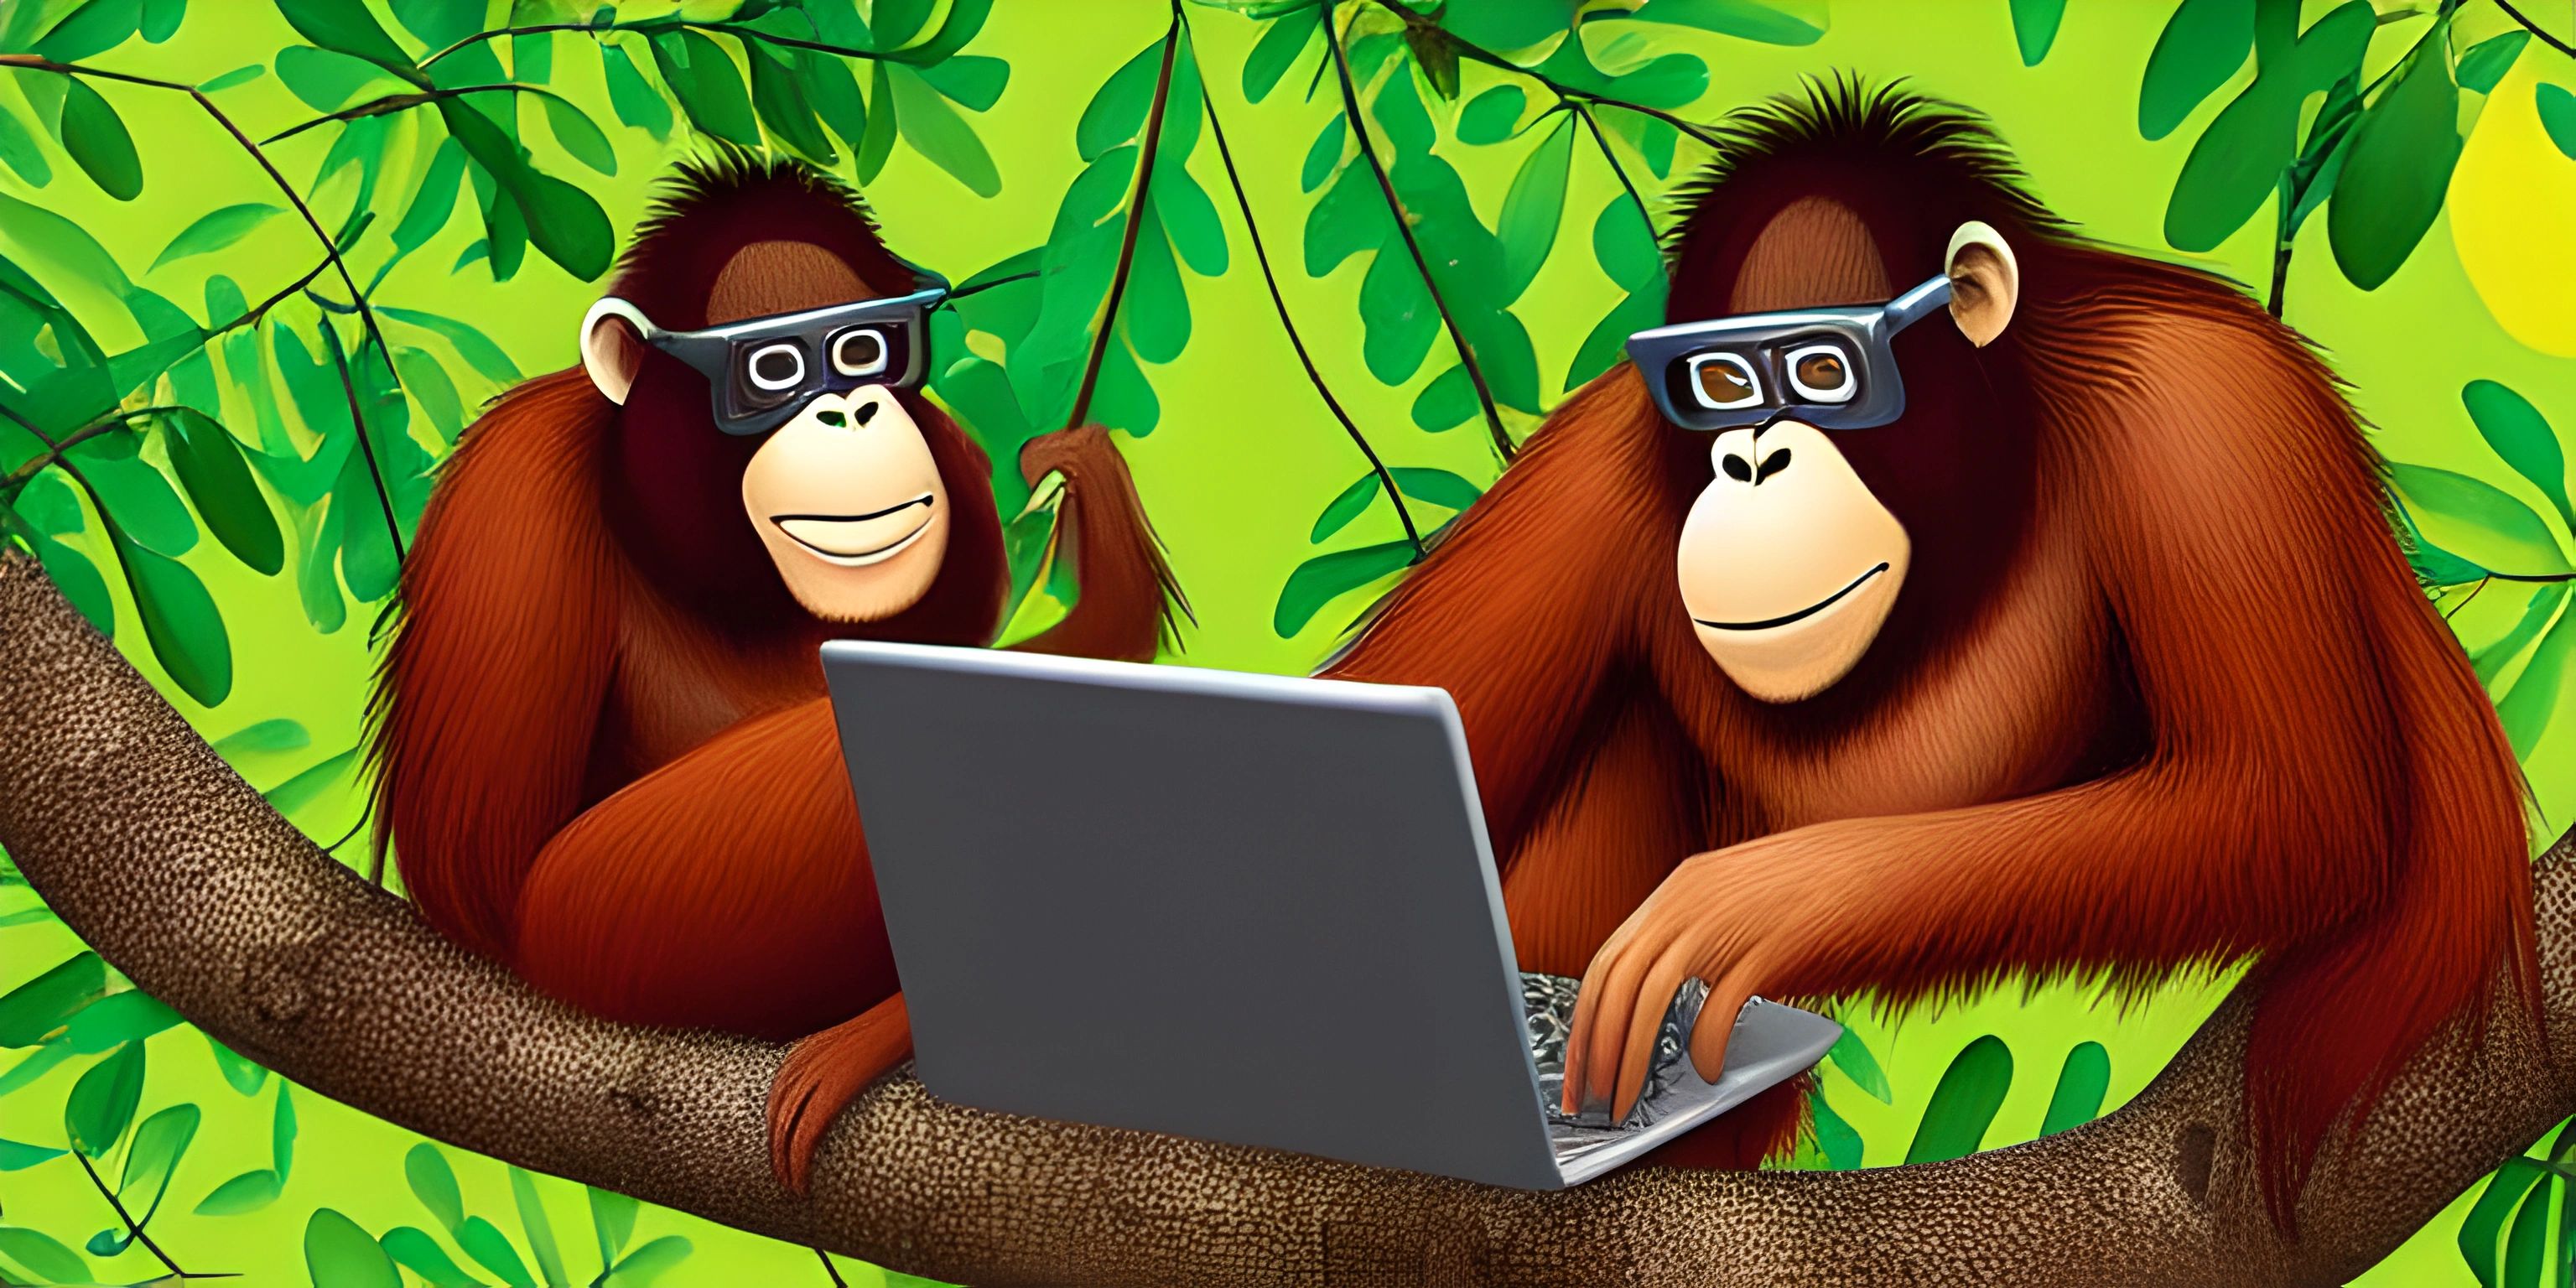 monkeys in the tree on a laptop computer with glasses on their heads and eyes in front